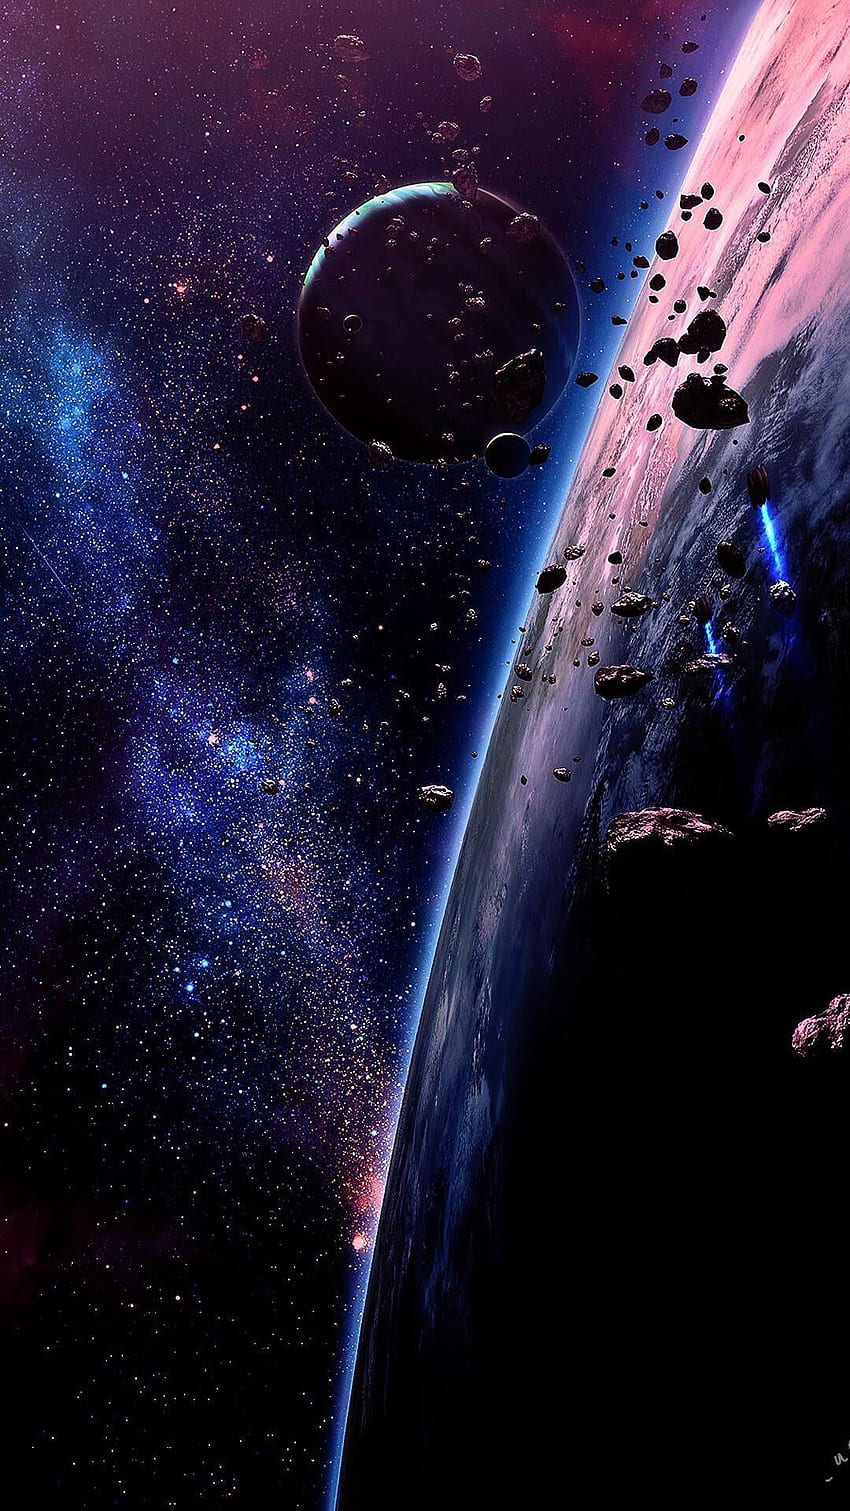 Andre Bundle on AMOLED (Space) in 2019, Super Cool Space HD phone wallpaper